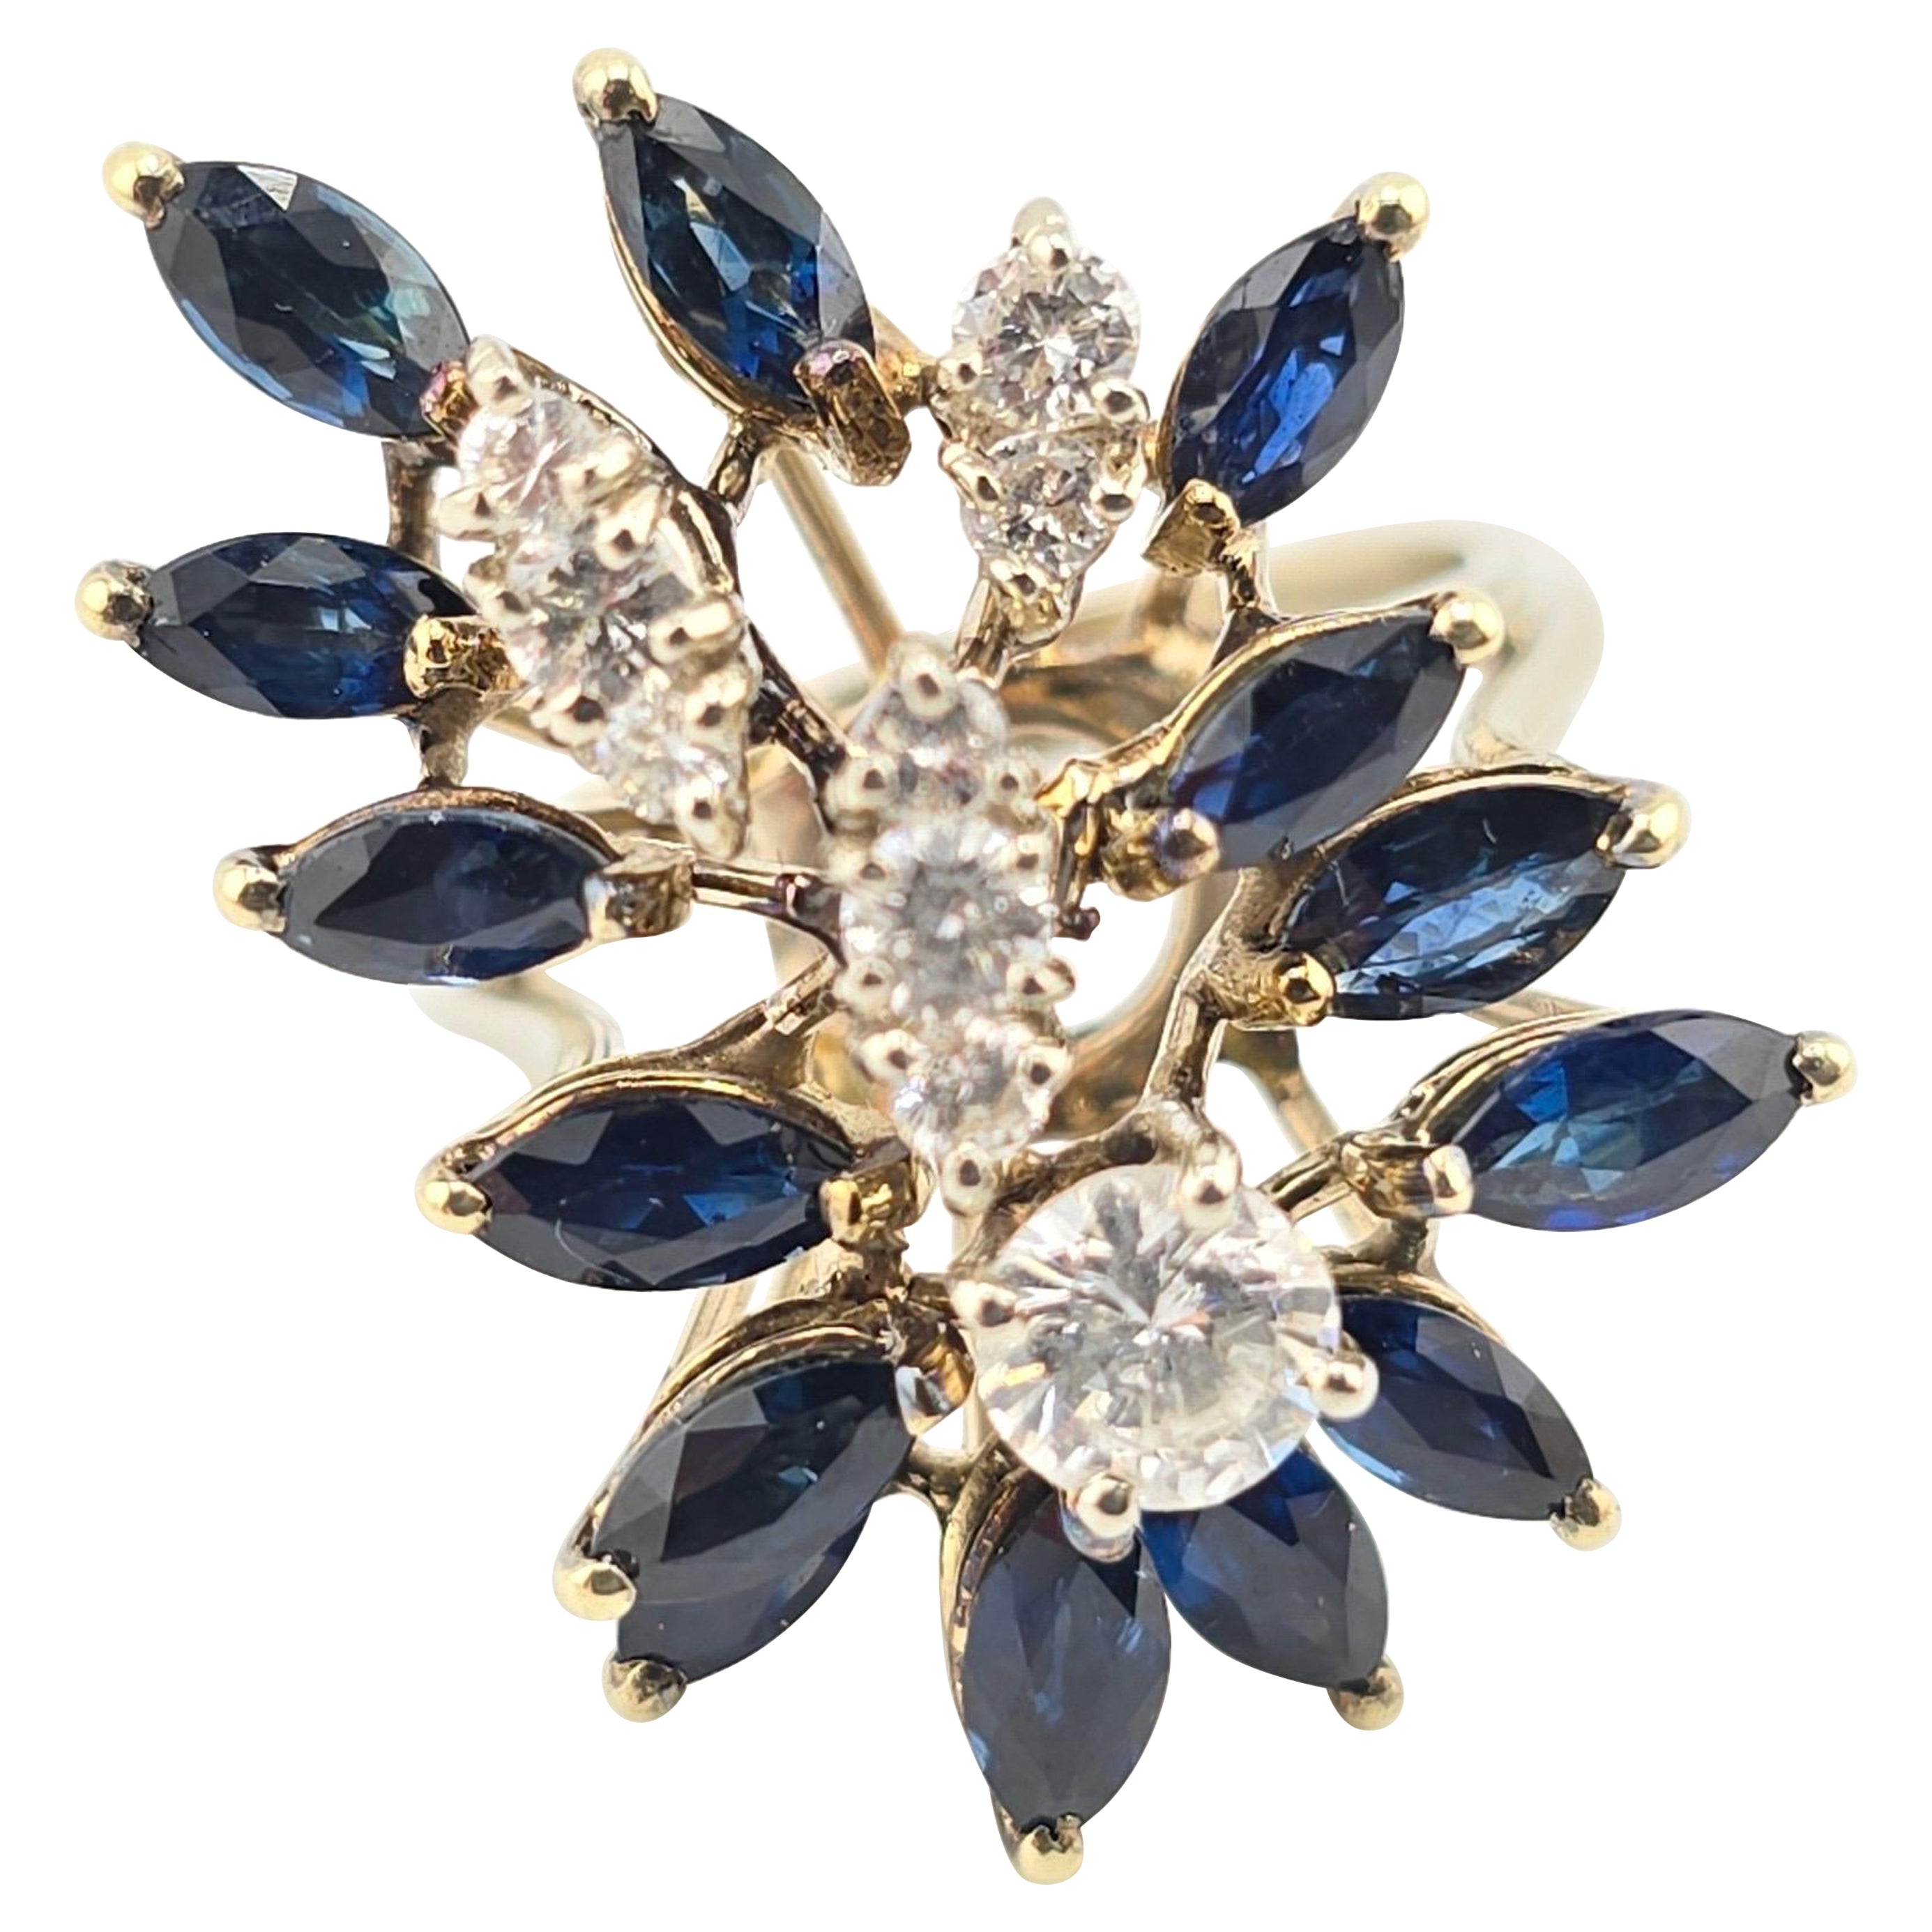 Marvelous Diamond & Sapphire Cluster Ring Gorgeous Stones For Sale